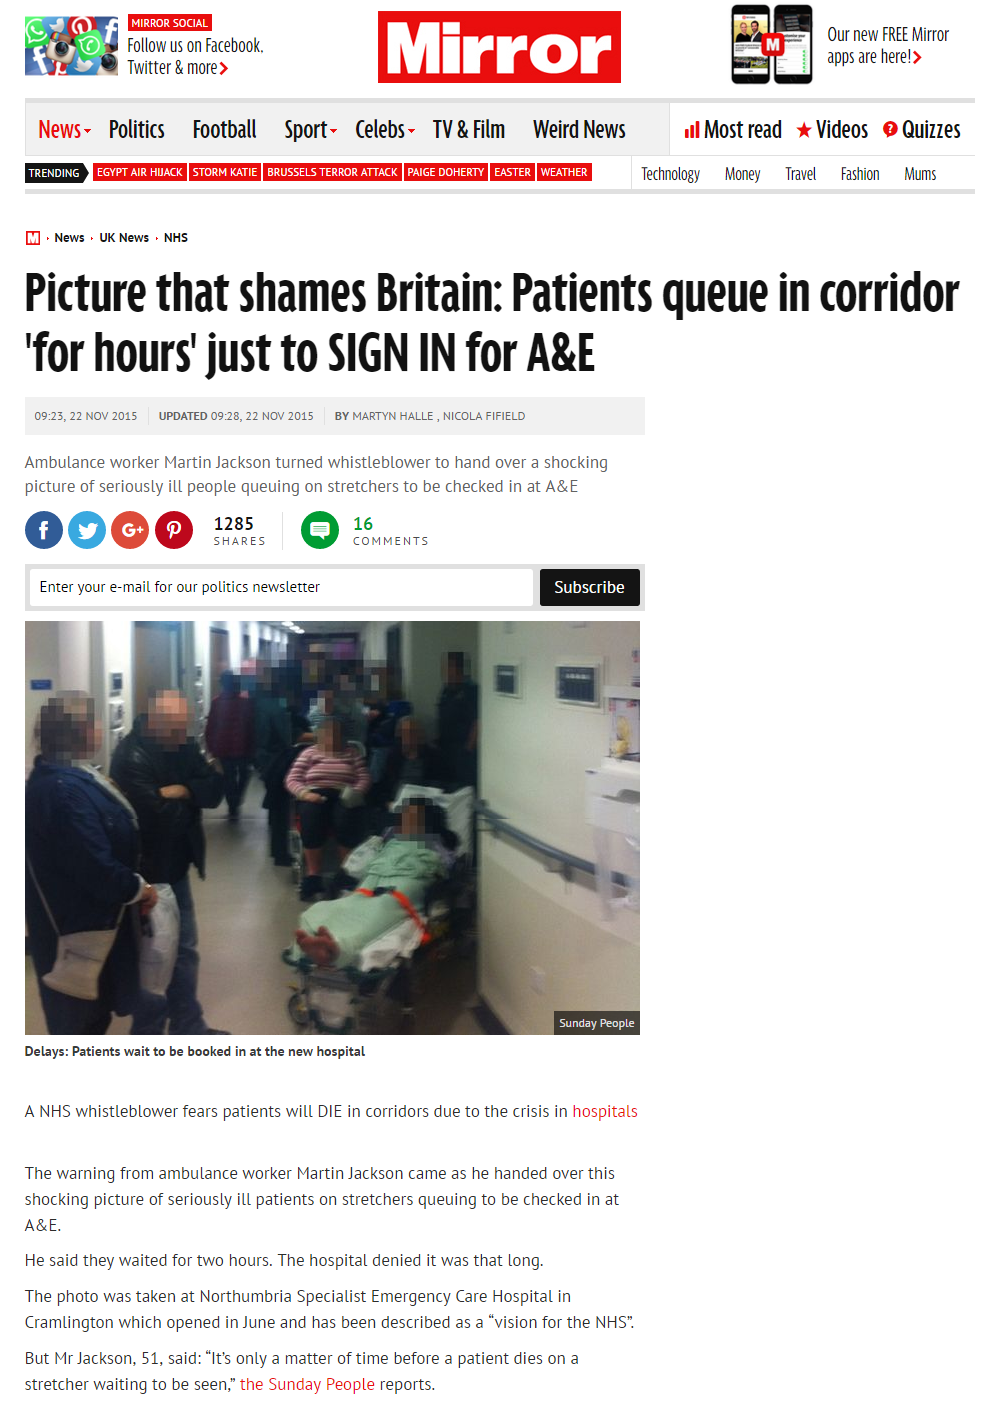 2015 11 22 - Daily Mirror - Picture that shames Britain - Northumbria Specialist Emergency Care Hospital Excerpt